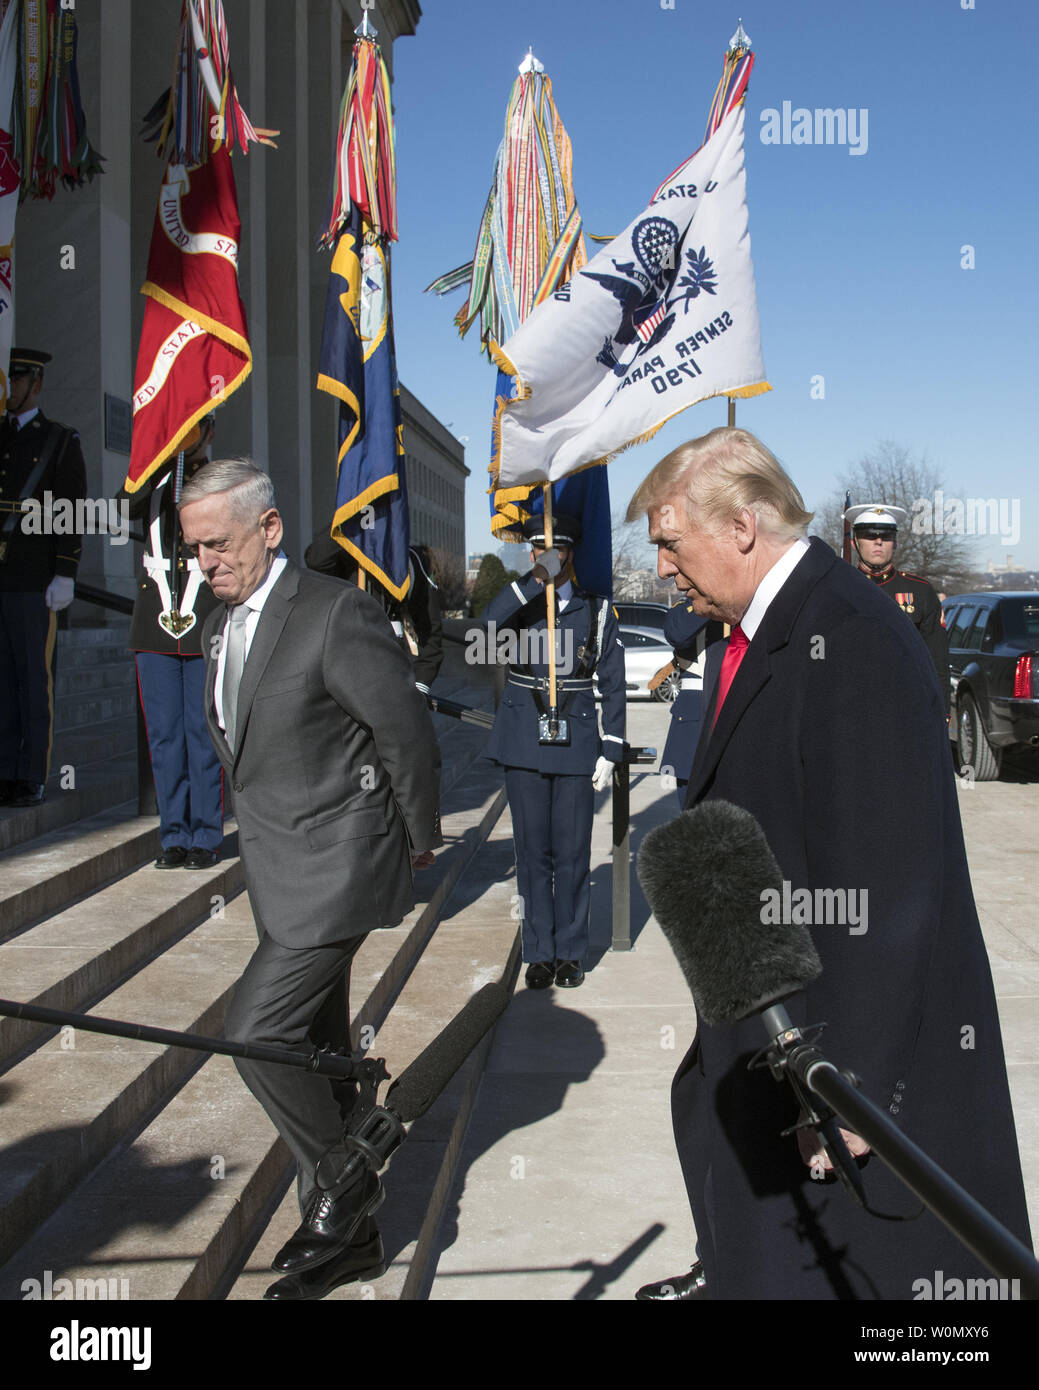 United States President Donald J. Trump, accompanied by US Secretary of Defense Jim Mattis, left, walks up the steps into the Pentagon after making a statement prior to going into meetings at the Pentagon in Washington, DC on Thursday, January 18, 2018.     Photo by Ron Sachs/UPI Stock Photo